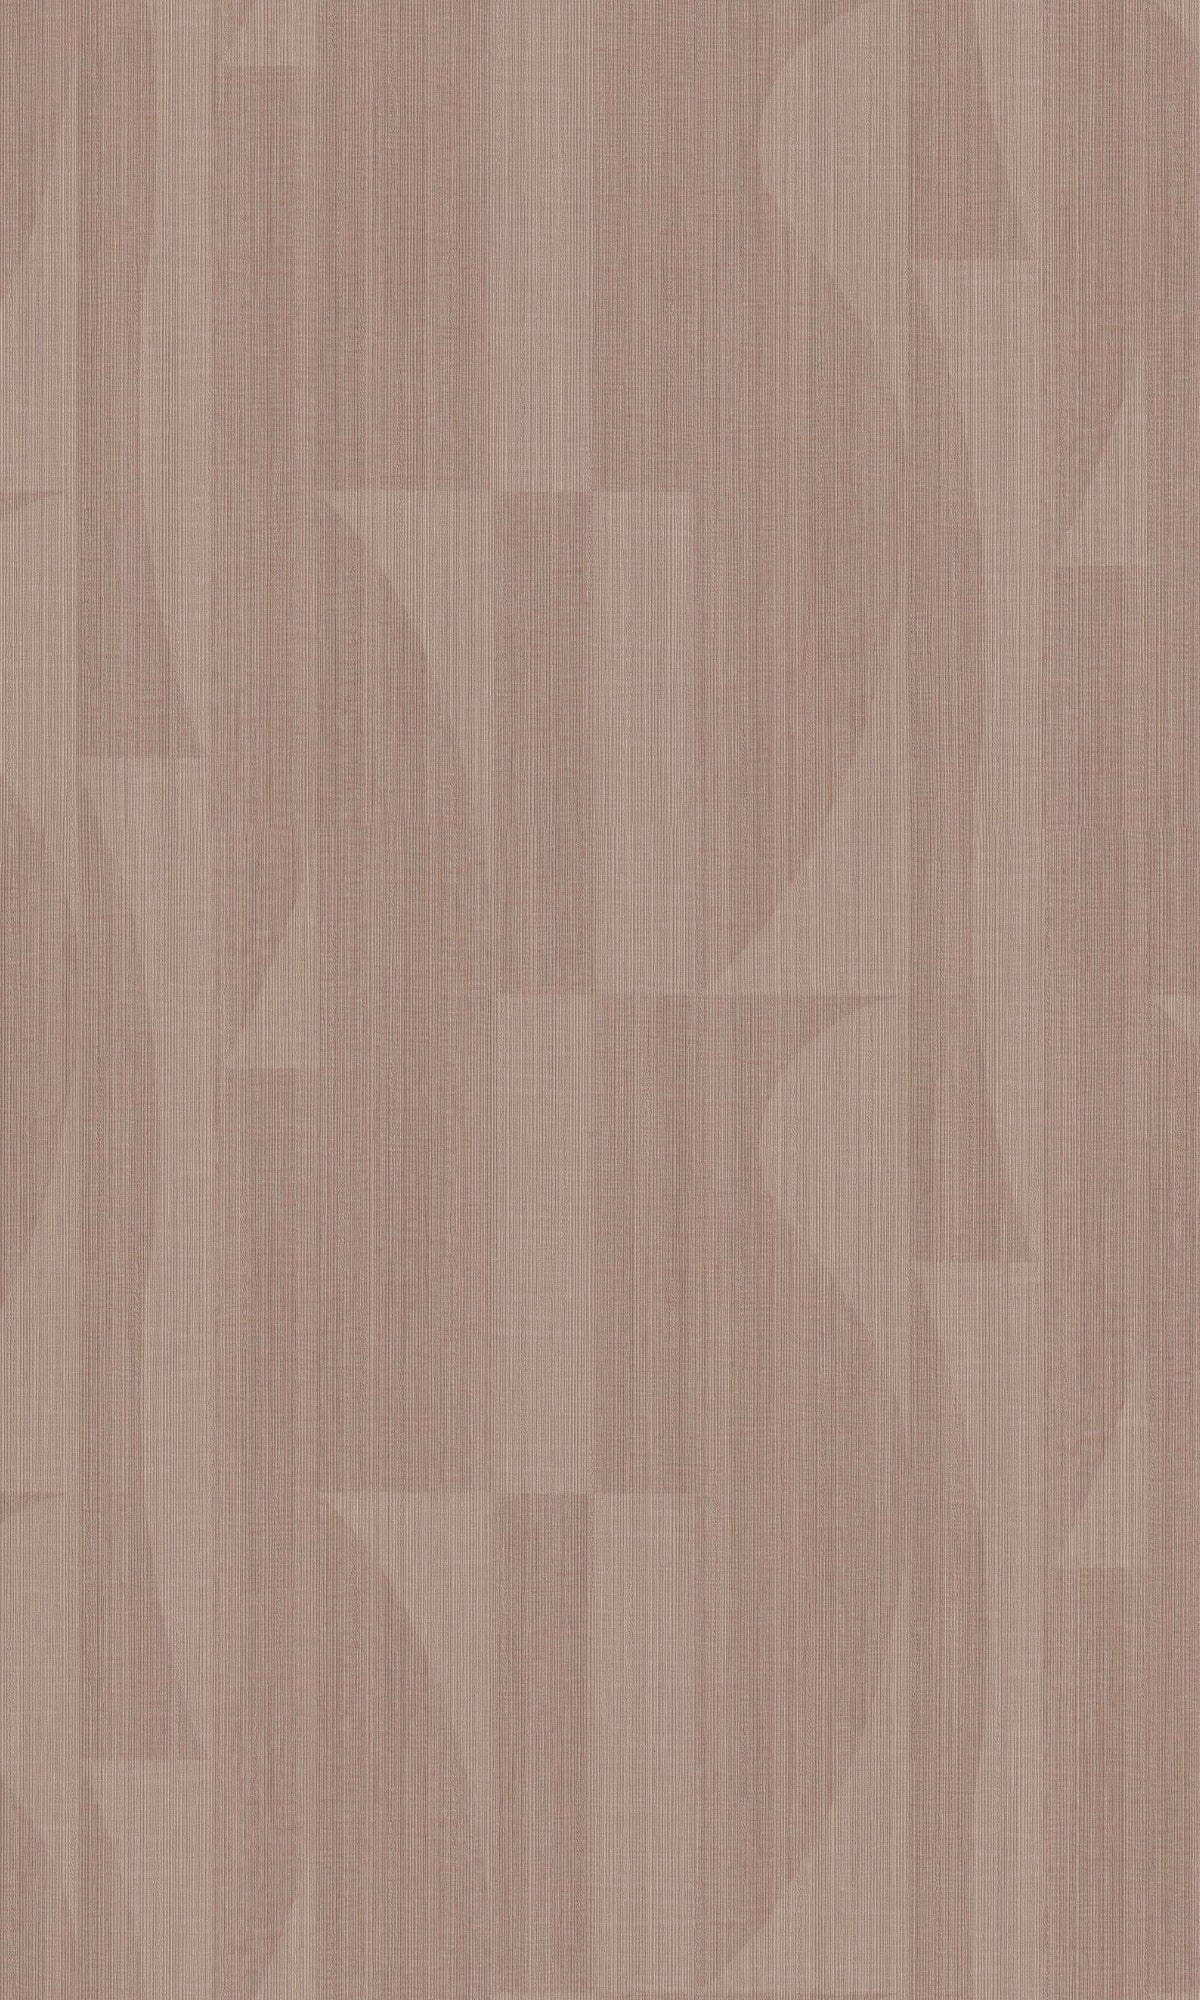 Taupe Geometric Graphic Pattern Wallpaper R8672